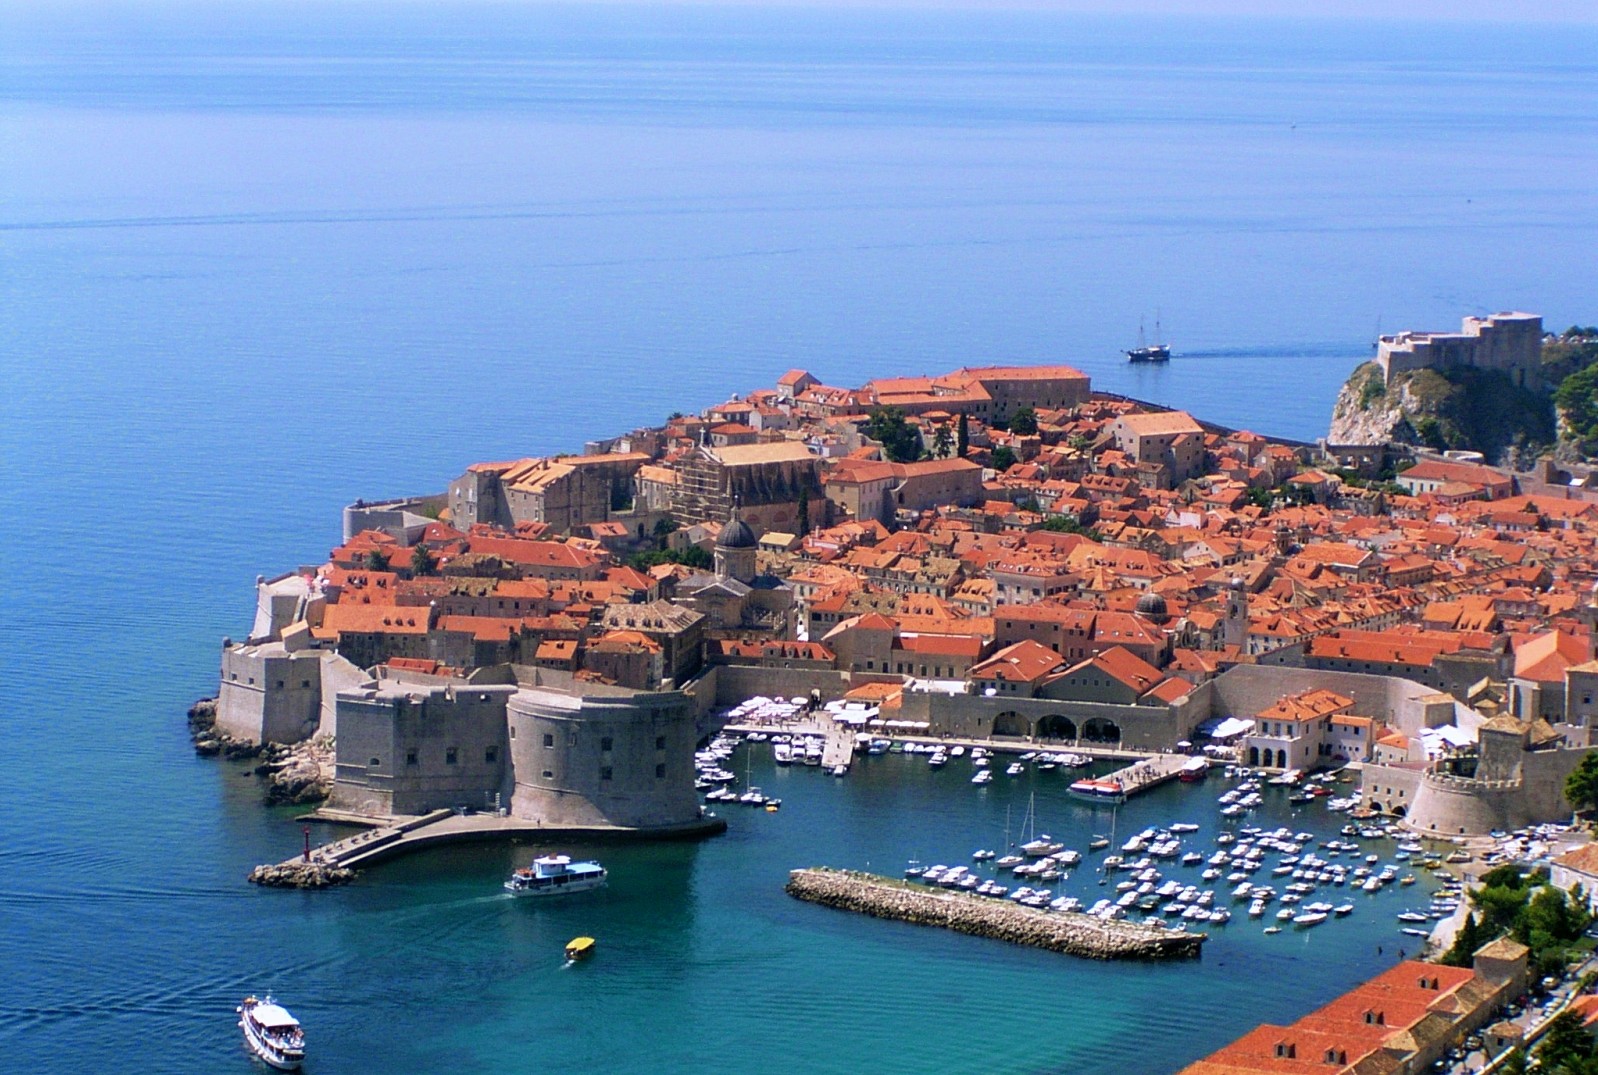 The view over the old town of Dubrovnik